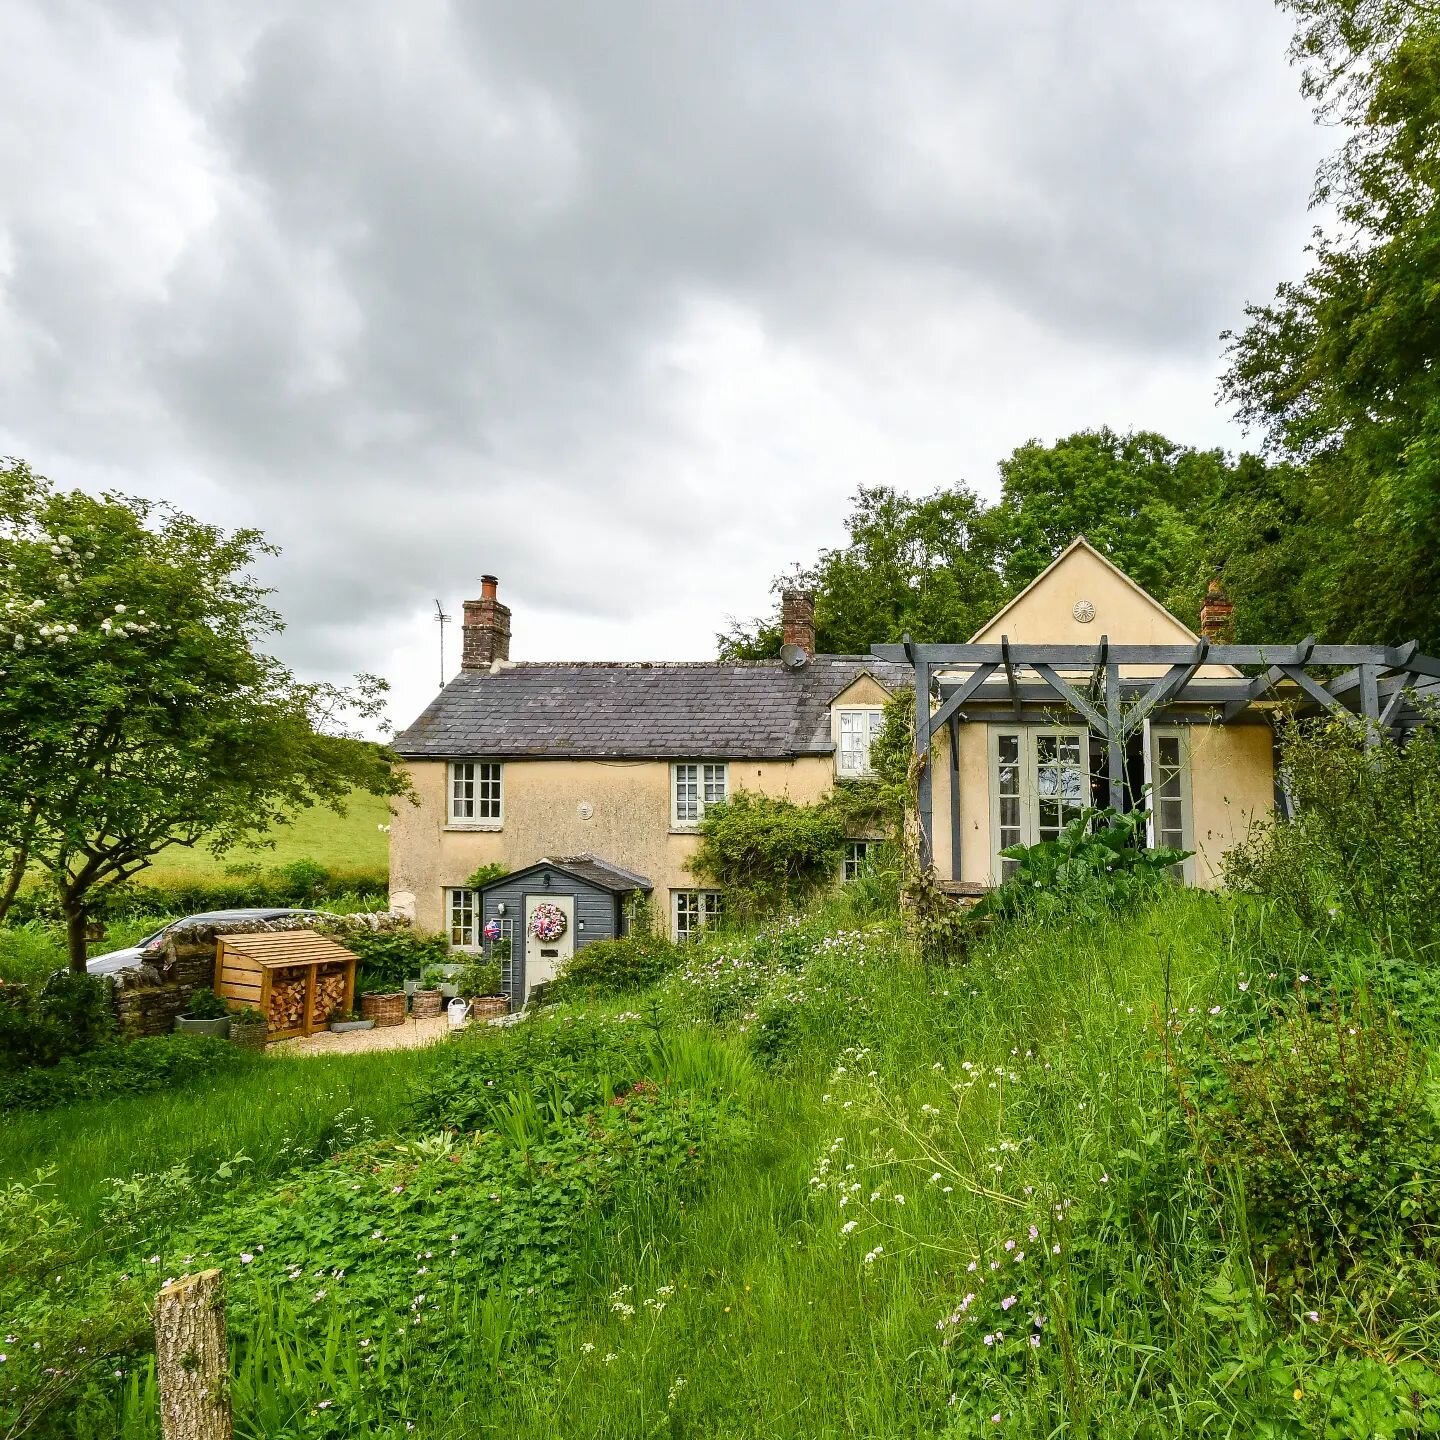 This week we're developing concept design ideas for renovations to this delightful  cottage near Burford. The house has several level changes which follow the natural topography of the site, making it an exciting challenge to reconfigure the living s